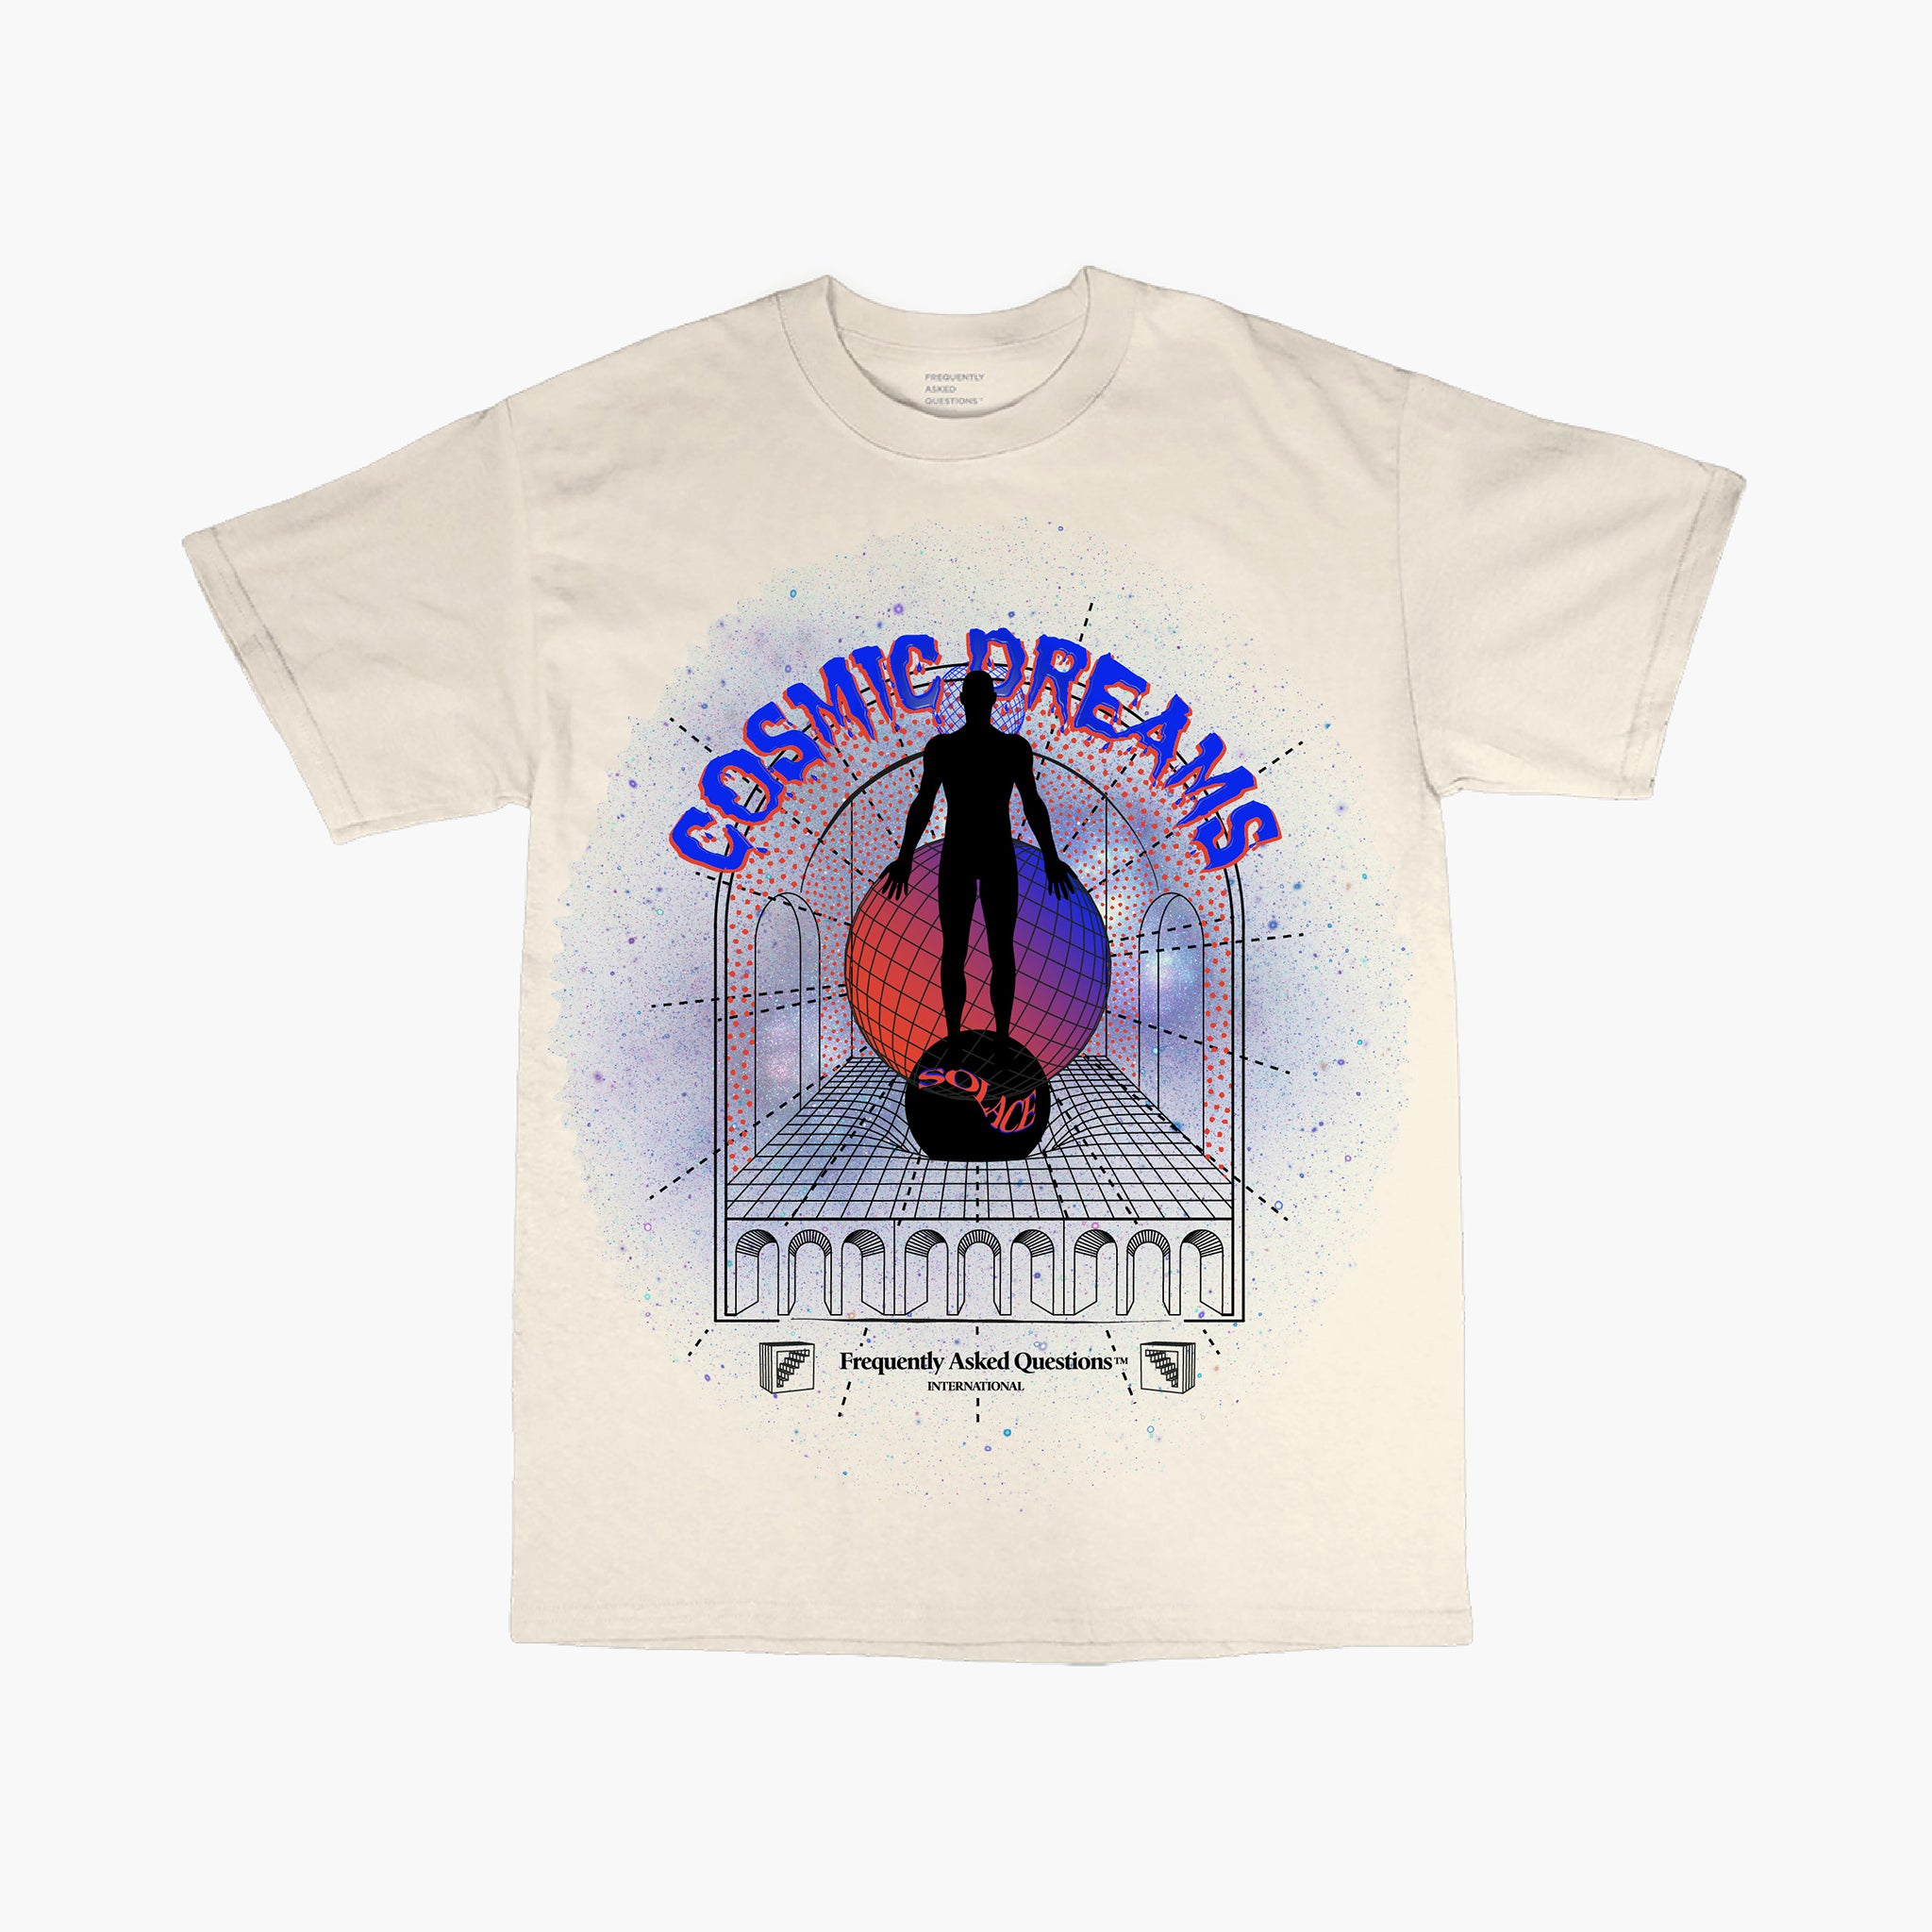 Cosmic Dreams T-Shirt - Frequently Asked Questions